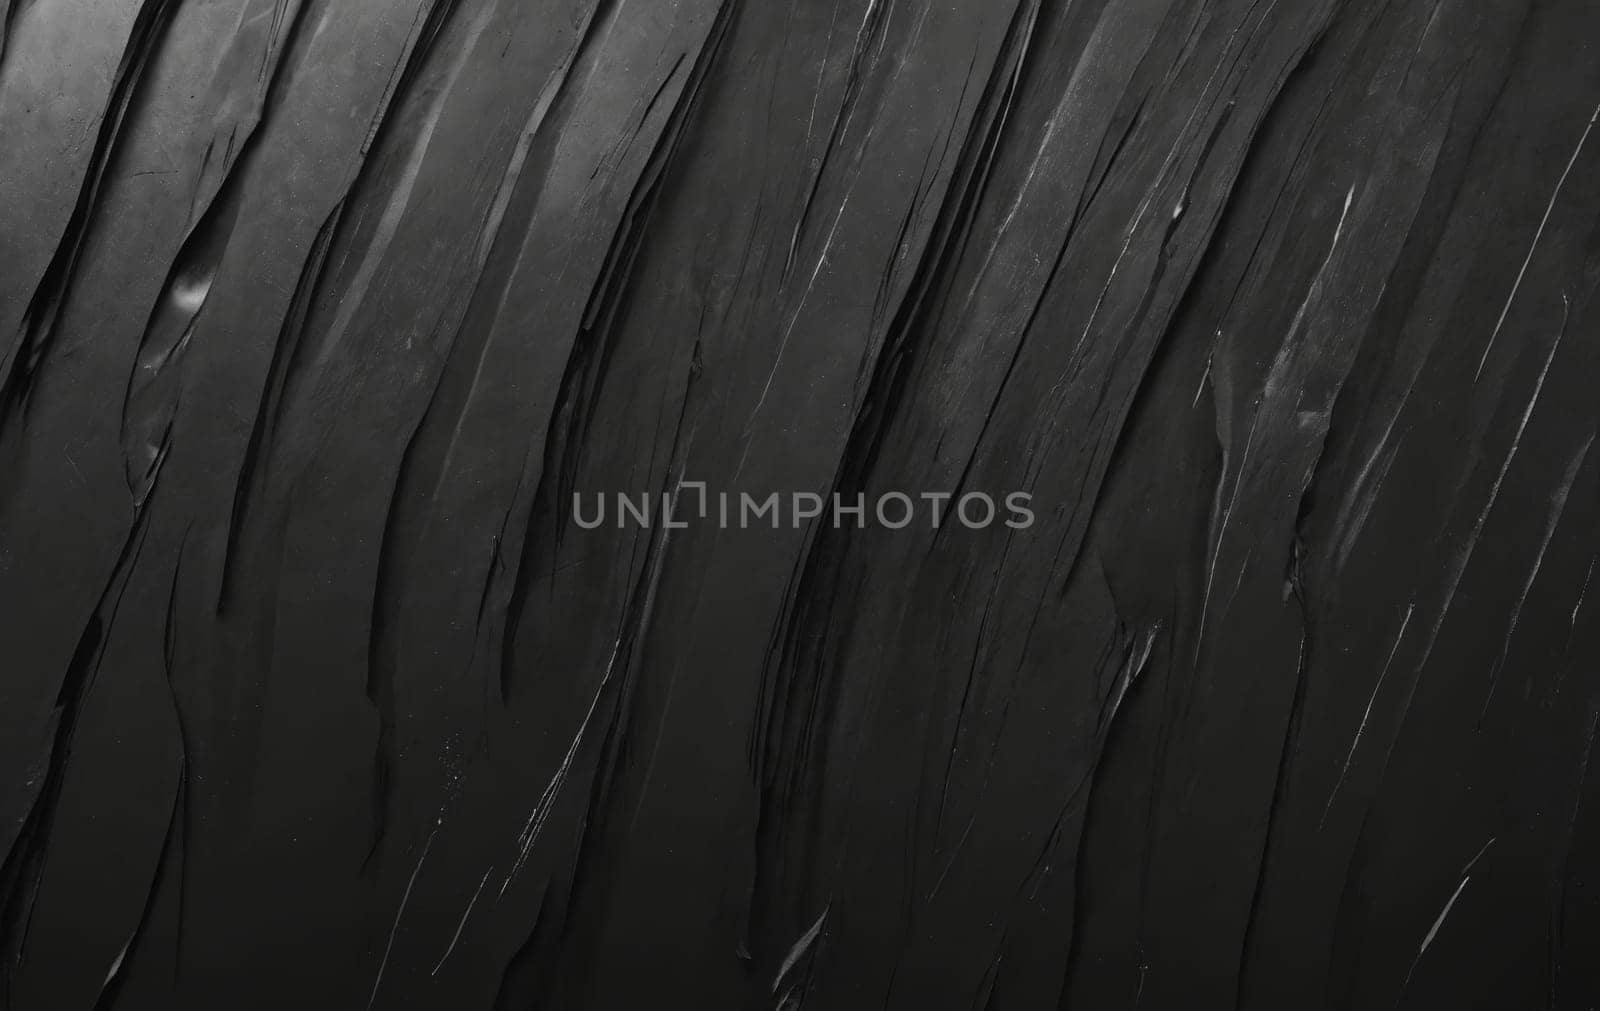 A detailed image of a black feather texture against a black background, resembling tints and shades commonly found in automotive tires and flooring materials made of synthetic rubber